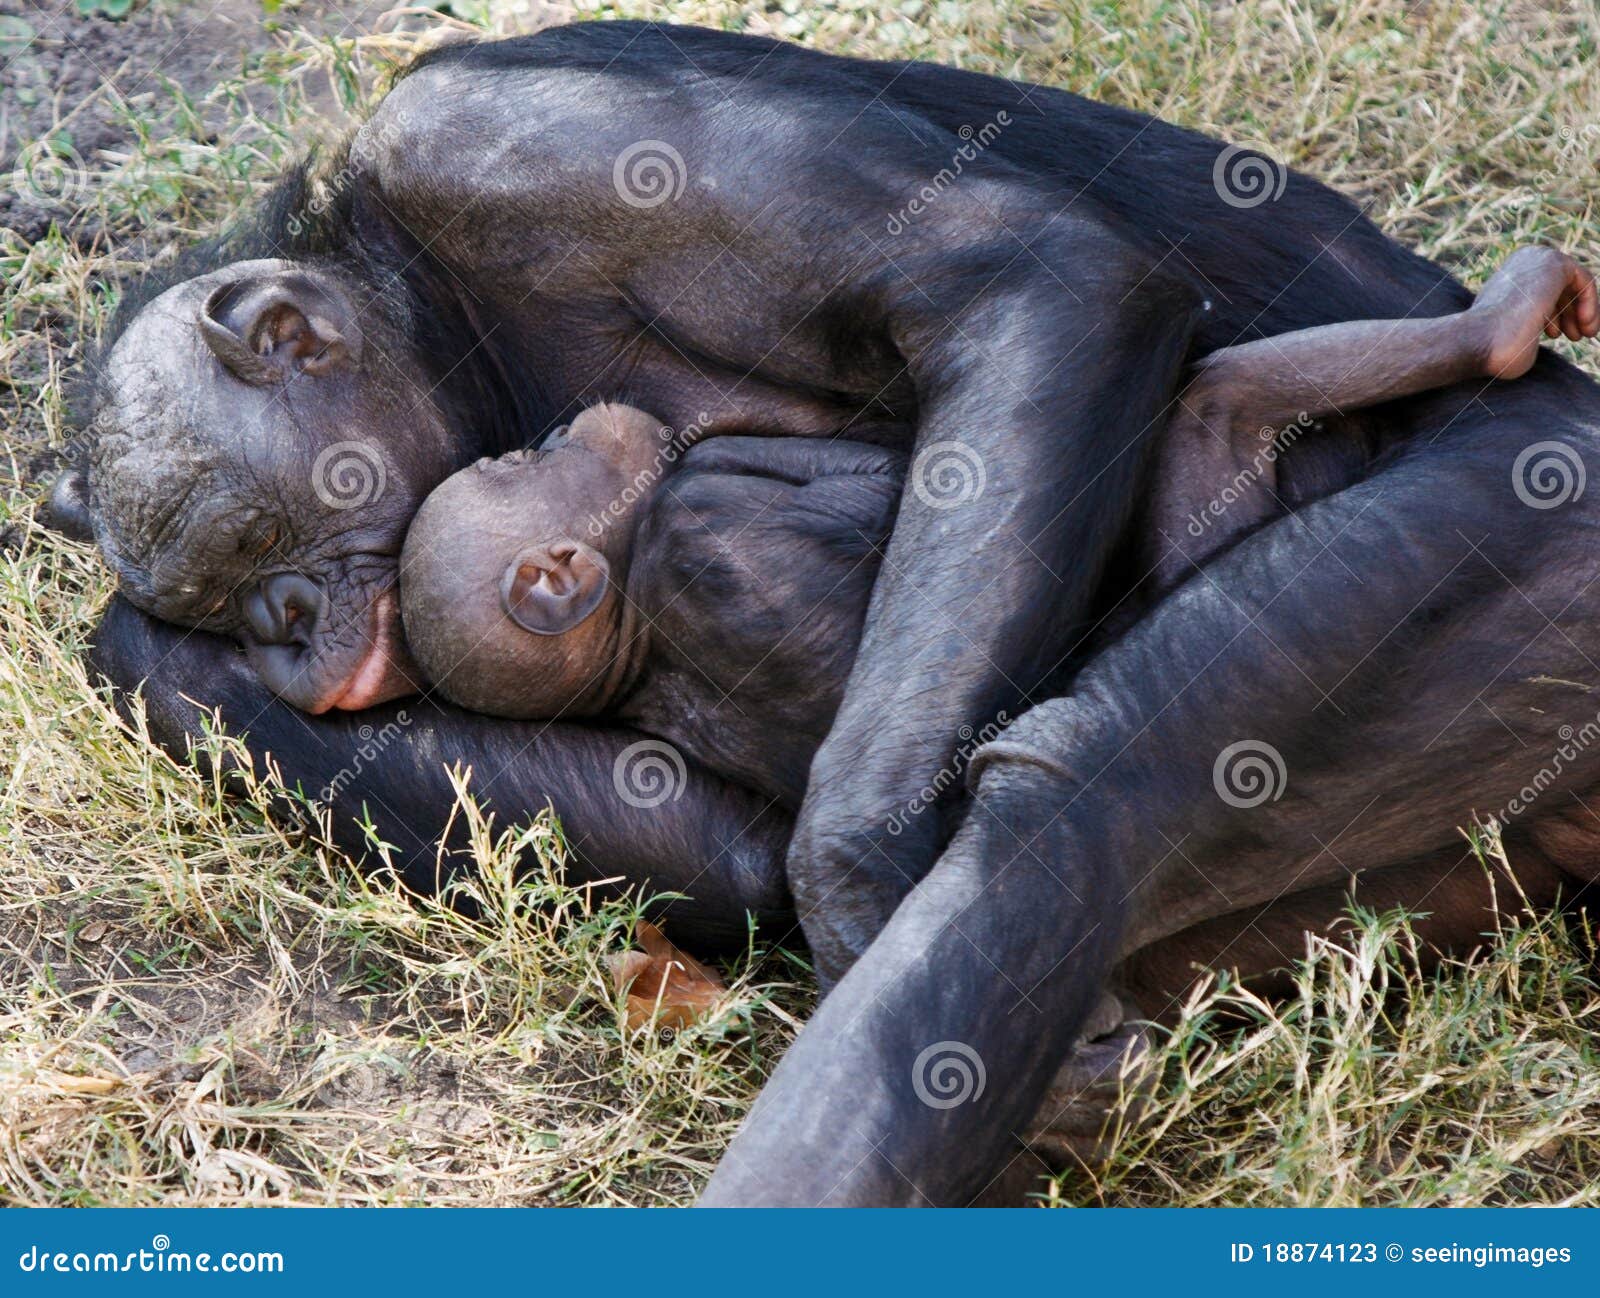 bonobo mother and child sleeping in grass